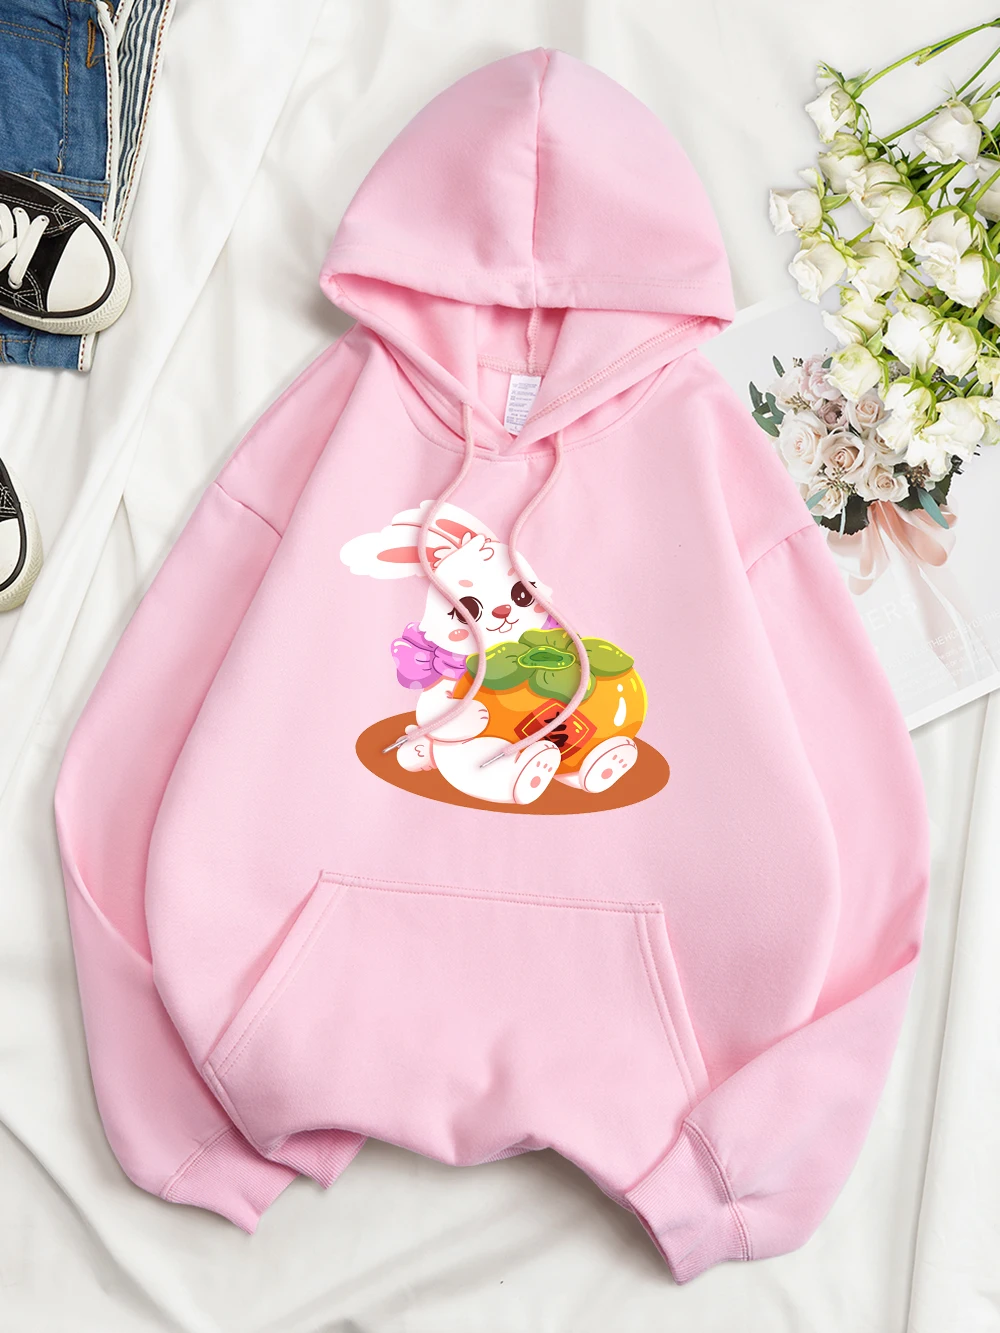 

Rabbit With Persimmon Everything Goes Well In The New Year Female Sweatshirt All-math Loose Tops Cartoons Womans Cotton Clothing